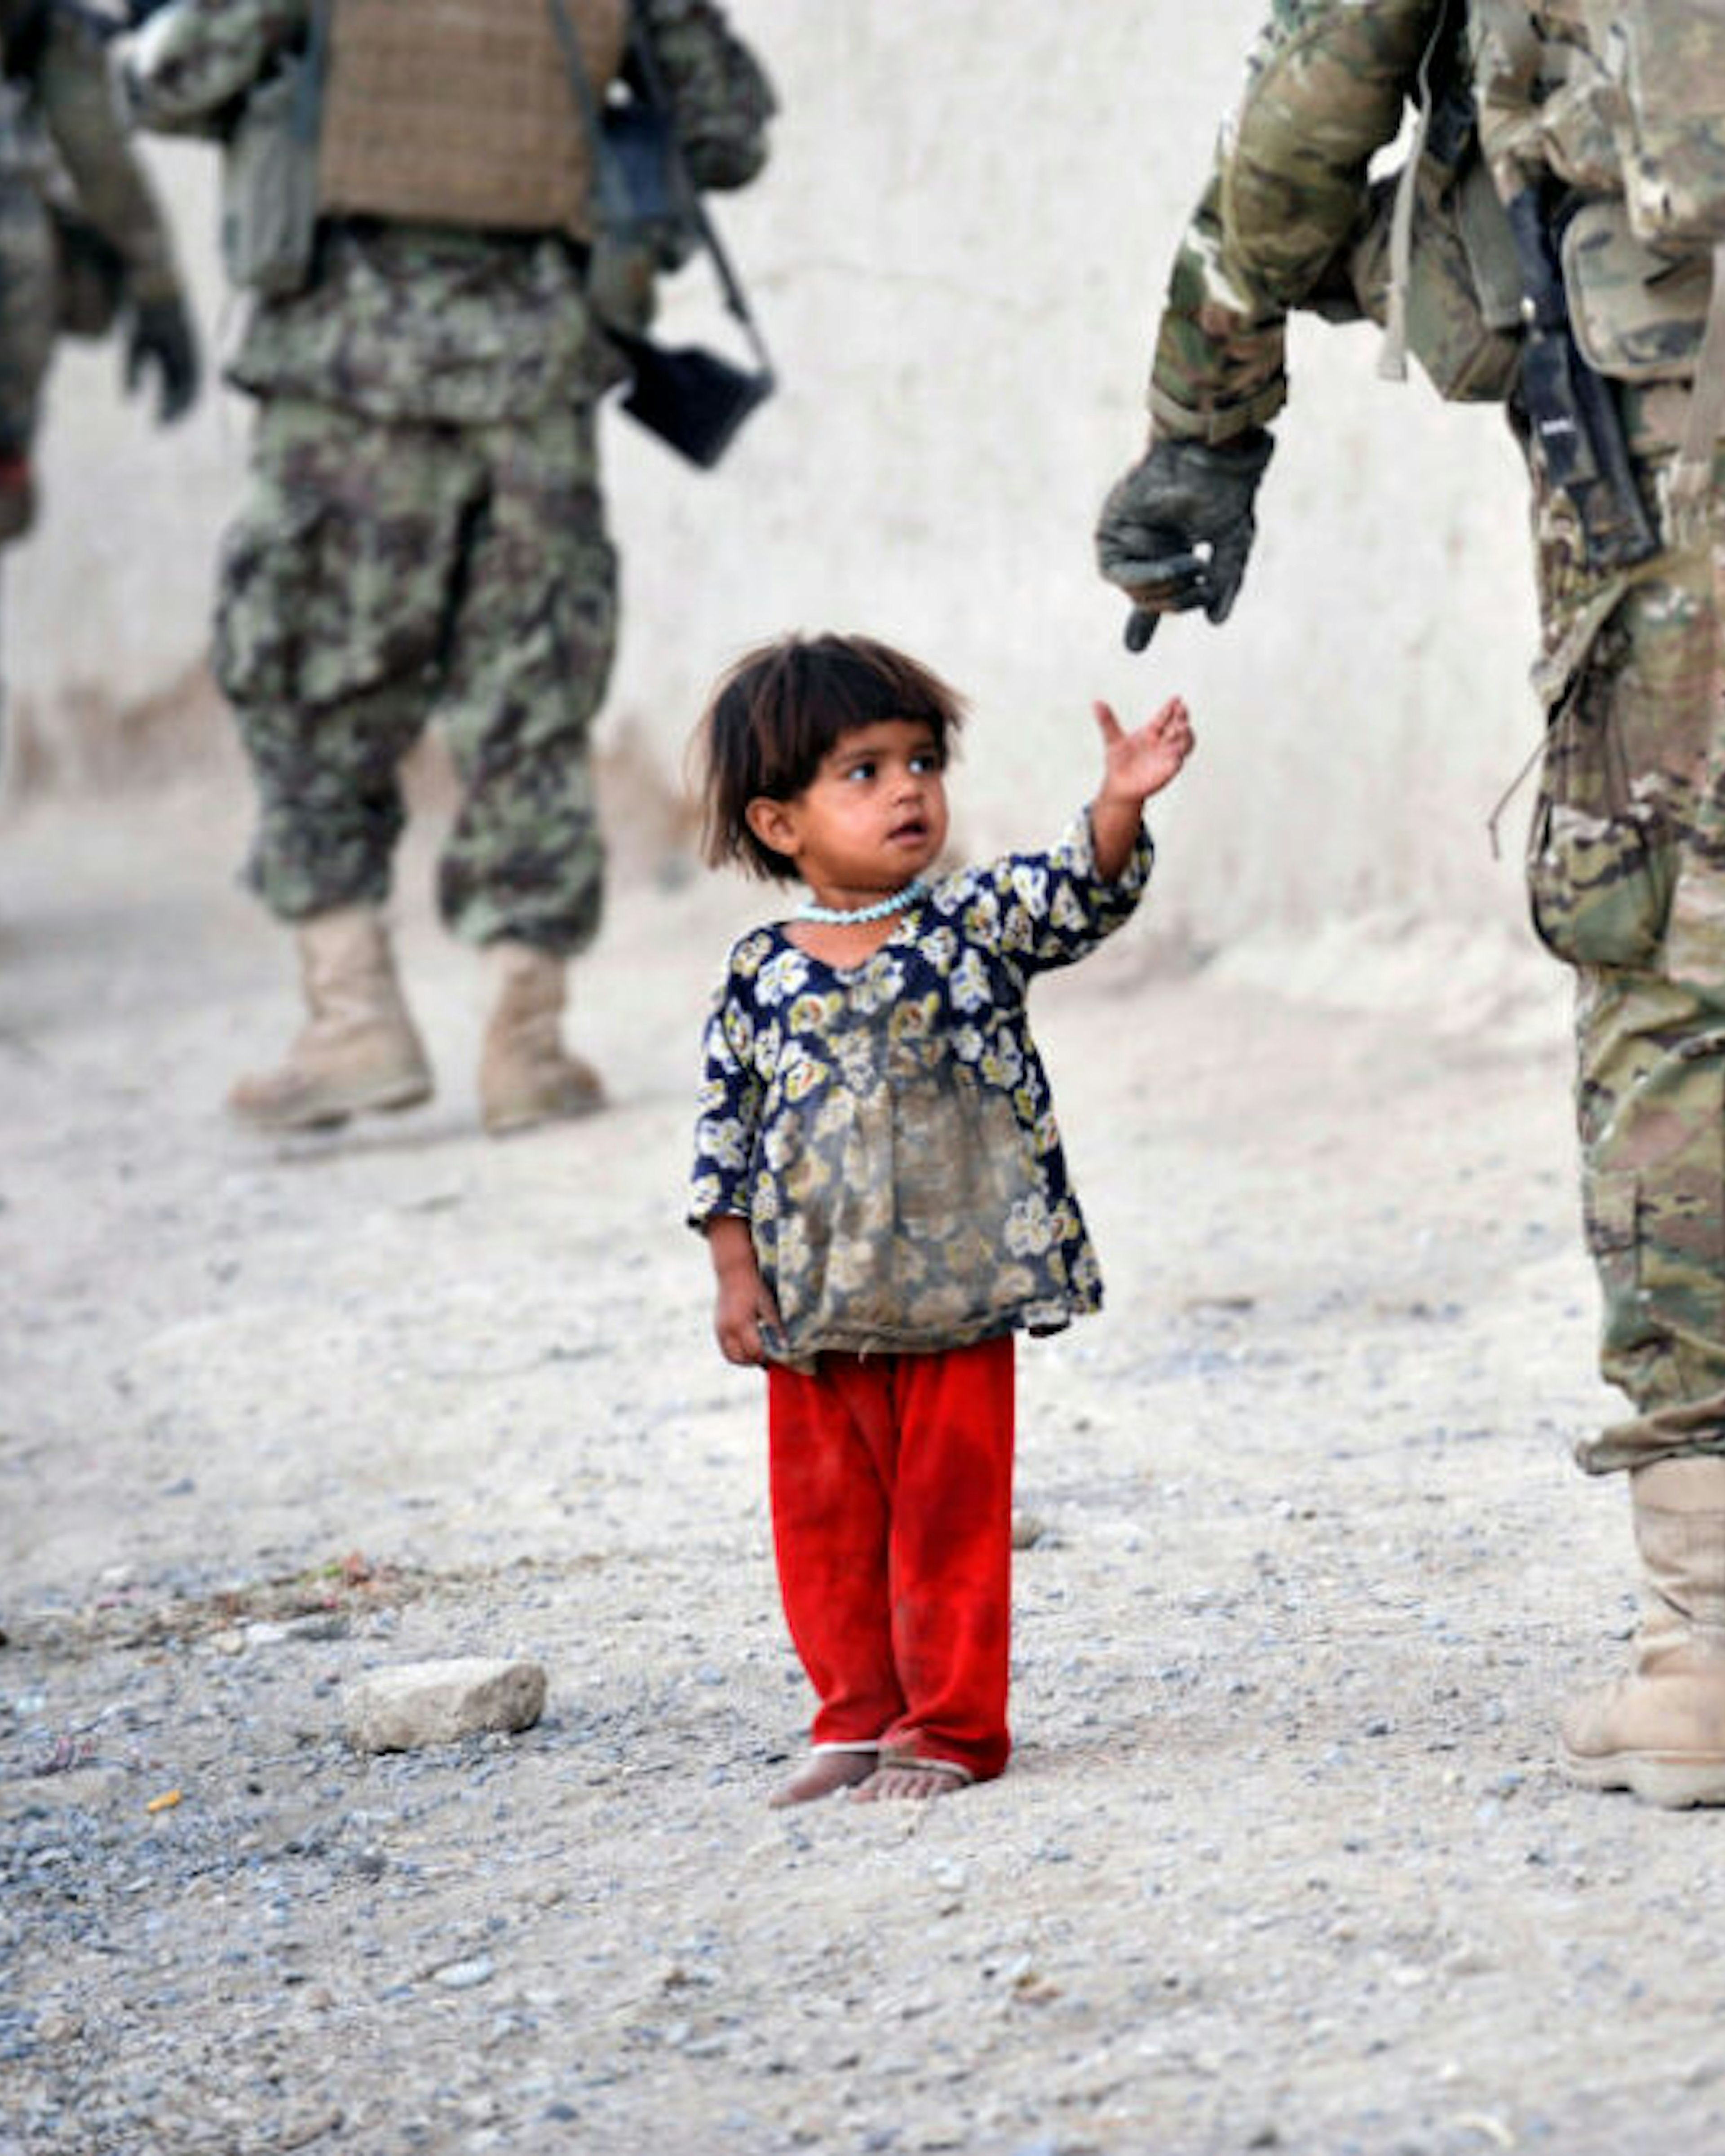 An Afghan girl greets a joint patrol of US troops from the Charlie Company, 2-87 Infantry, 3rd Brigade Combat Team and Afghan National Army soldiers at Kandalay village in the southern Afghan province of Kandahar on August 8, 2011 while US troops launched missile attacks on Taliban targets in nearby Kelawai village killing at least three and capturing two insurgents. US forces push their counterinsurgency efforts to battle for the hearts and minds of the local population.